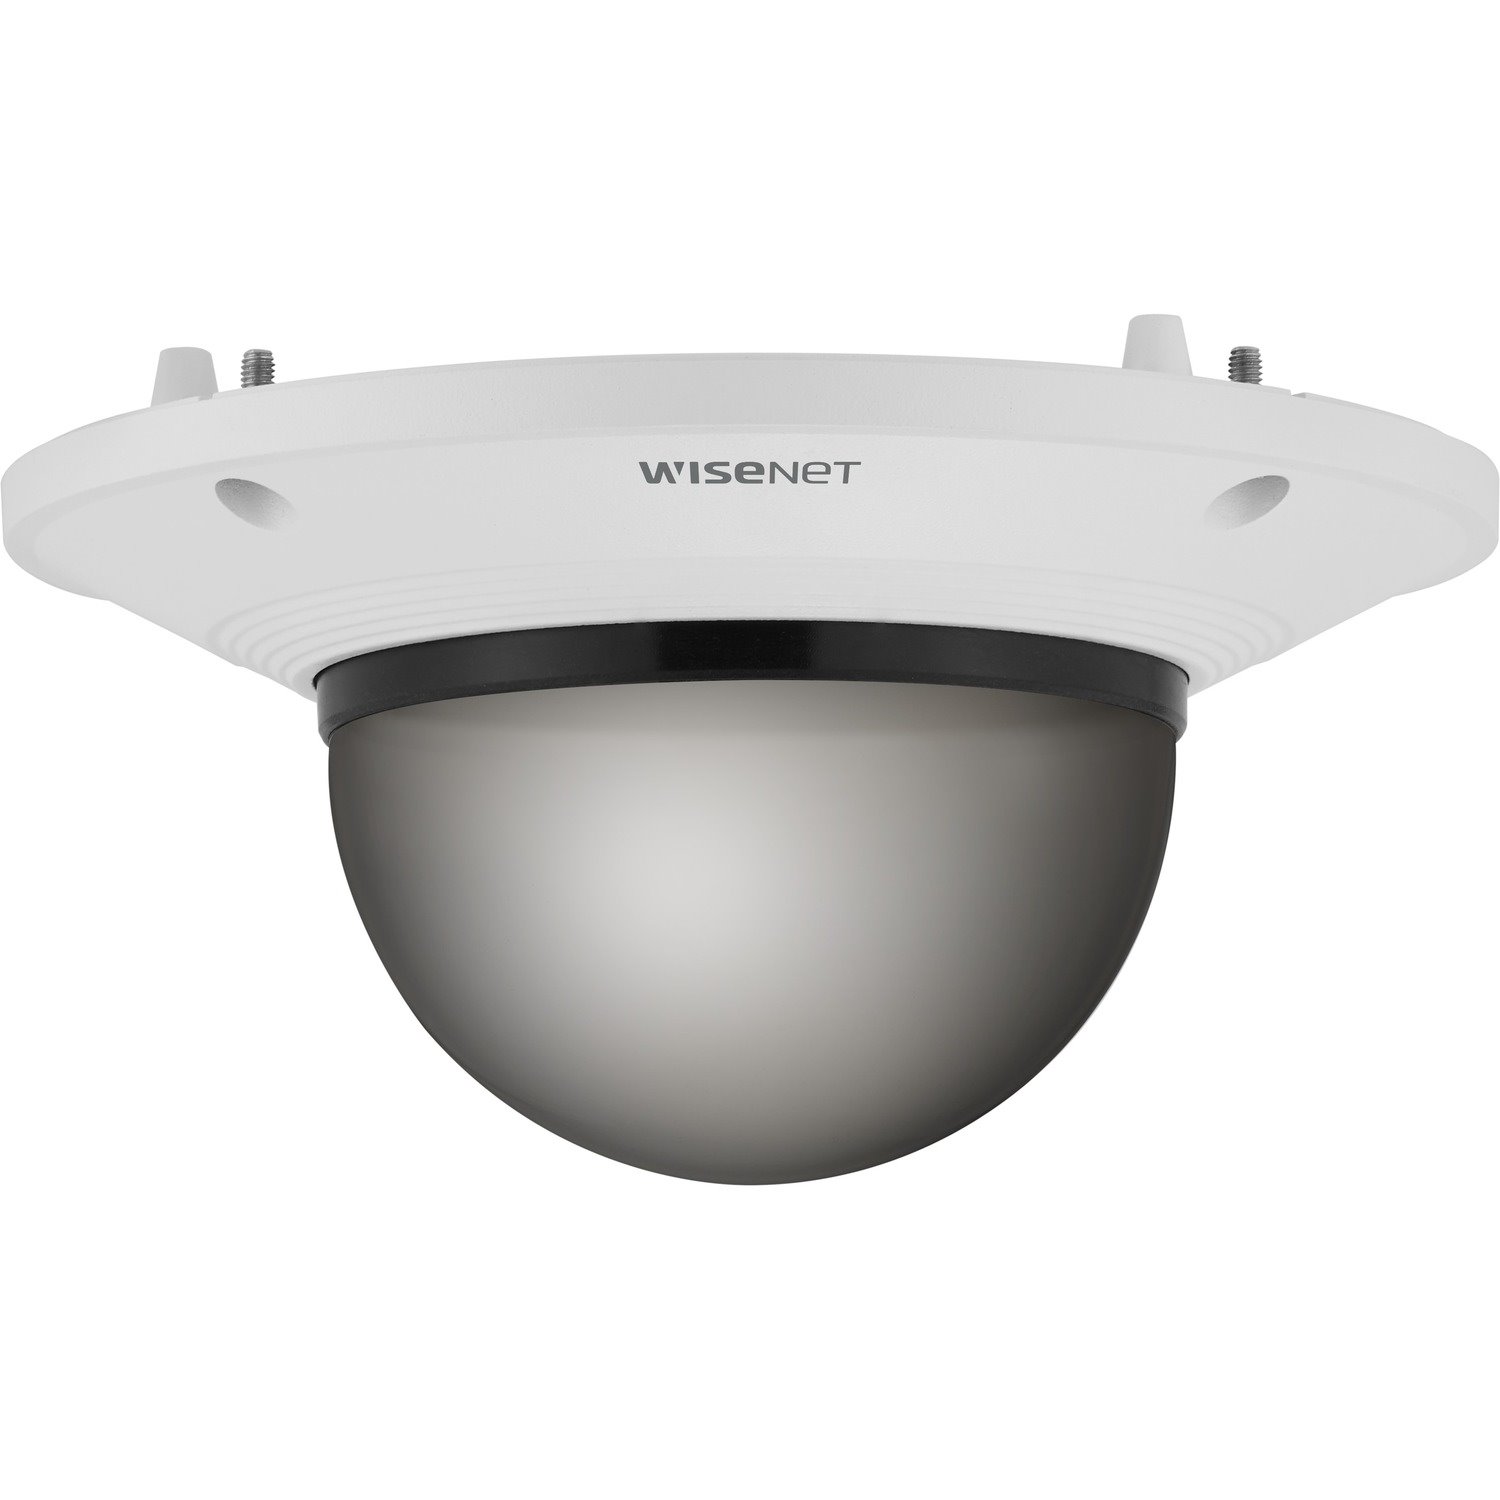 Wisenet Security Camera Dome Cover for Security Camera, Security Camera